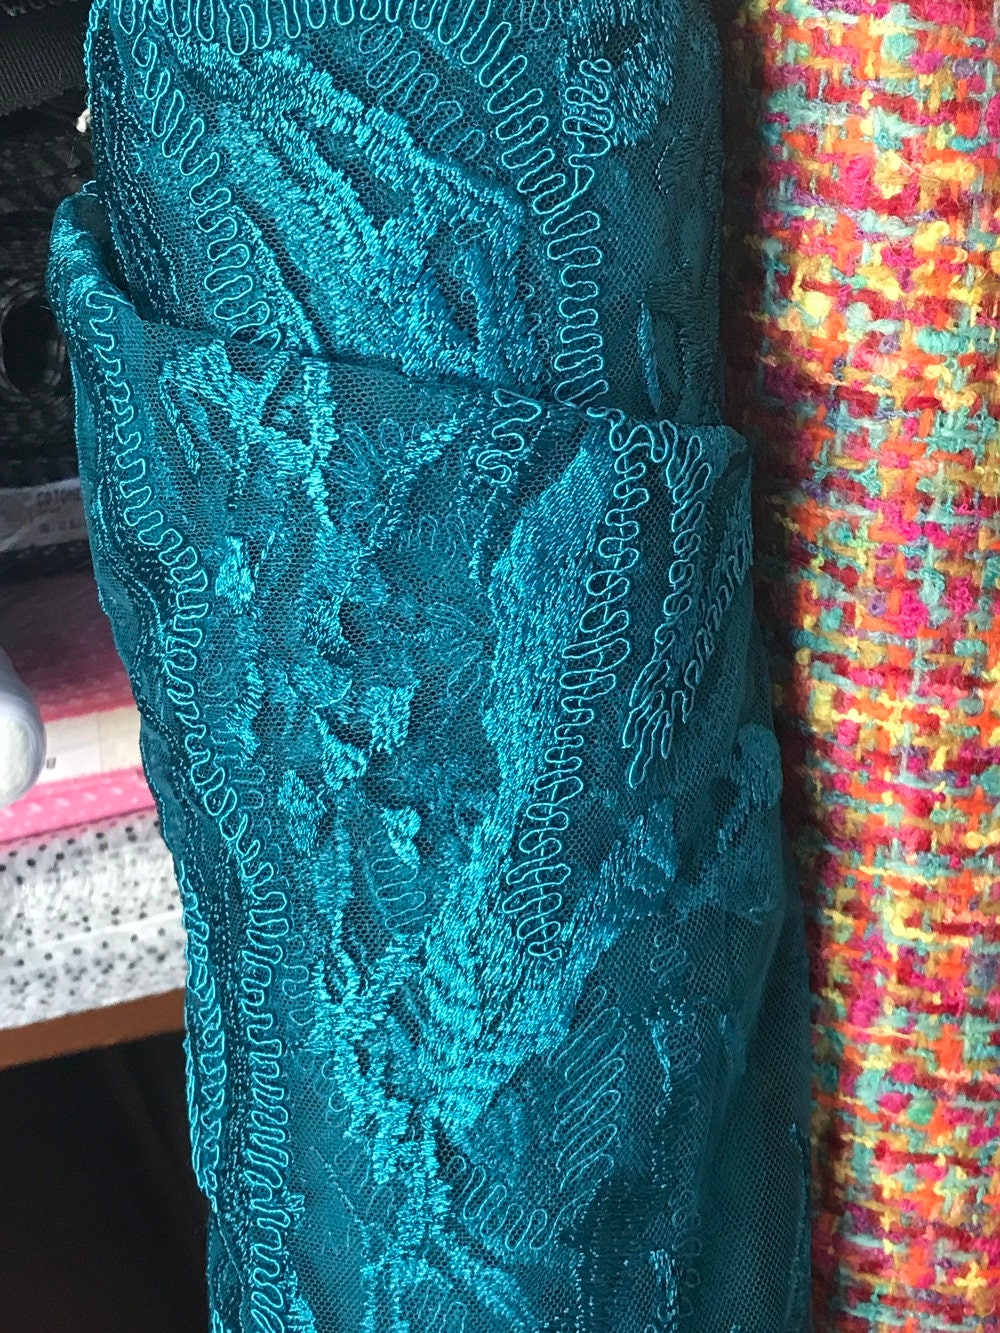 Teal Blue Petrol Corded Lace Fabric Scallop Edge Both Ends - Etsy